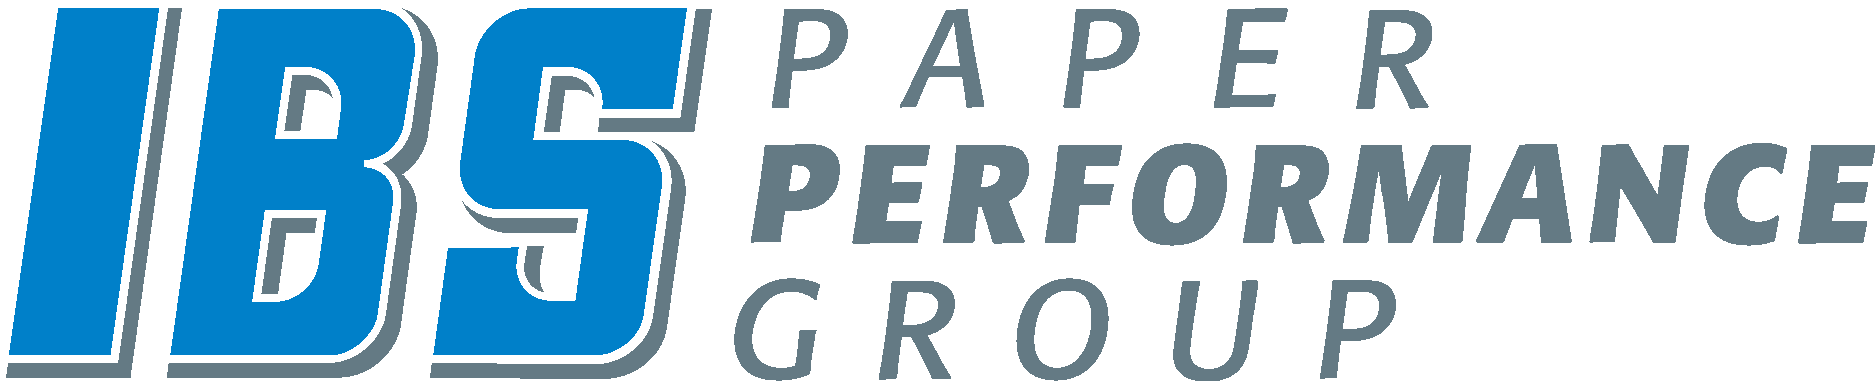 IBS Paper Performance Group Logo Vector